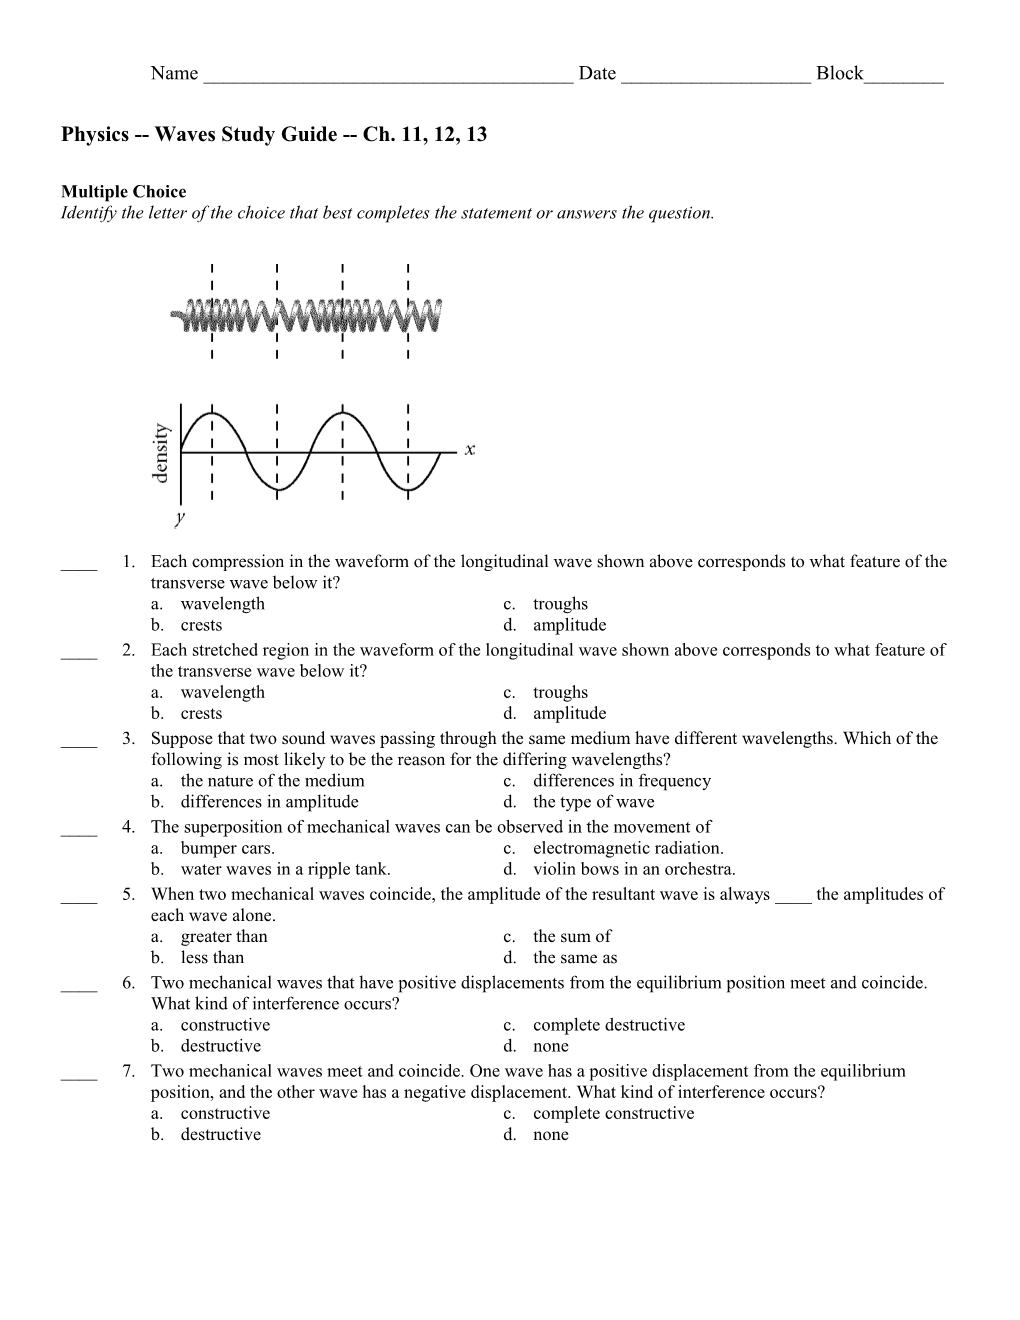 Physics Waves Study Guide Ch